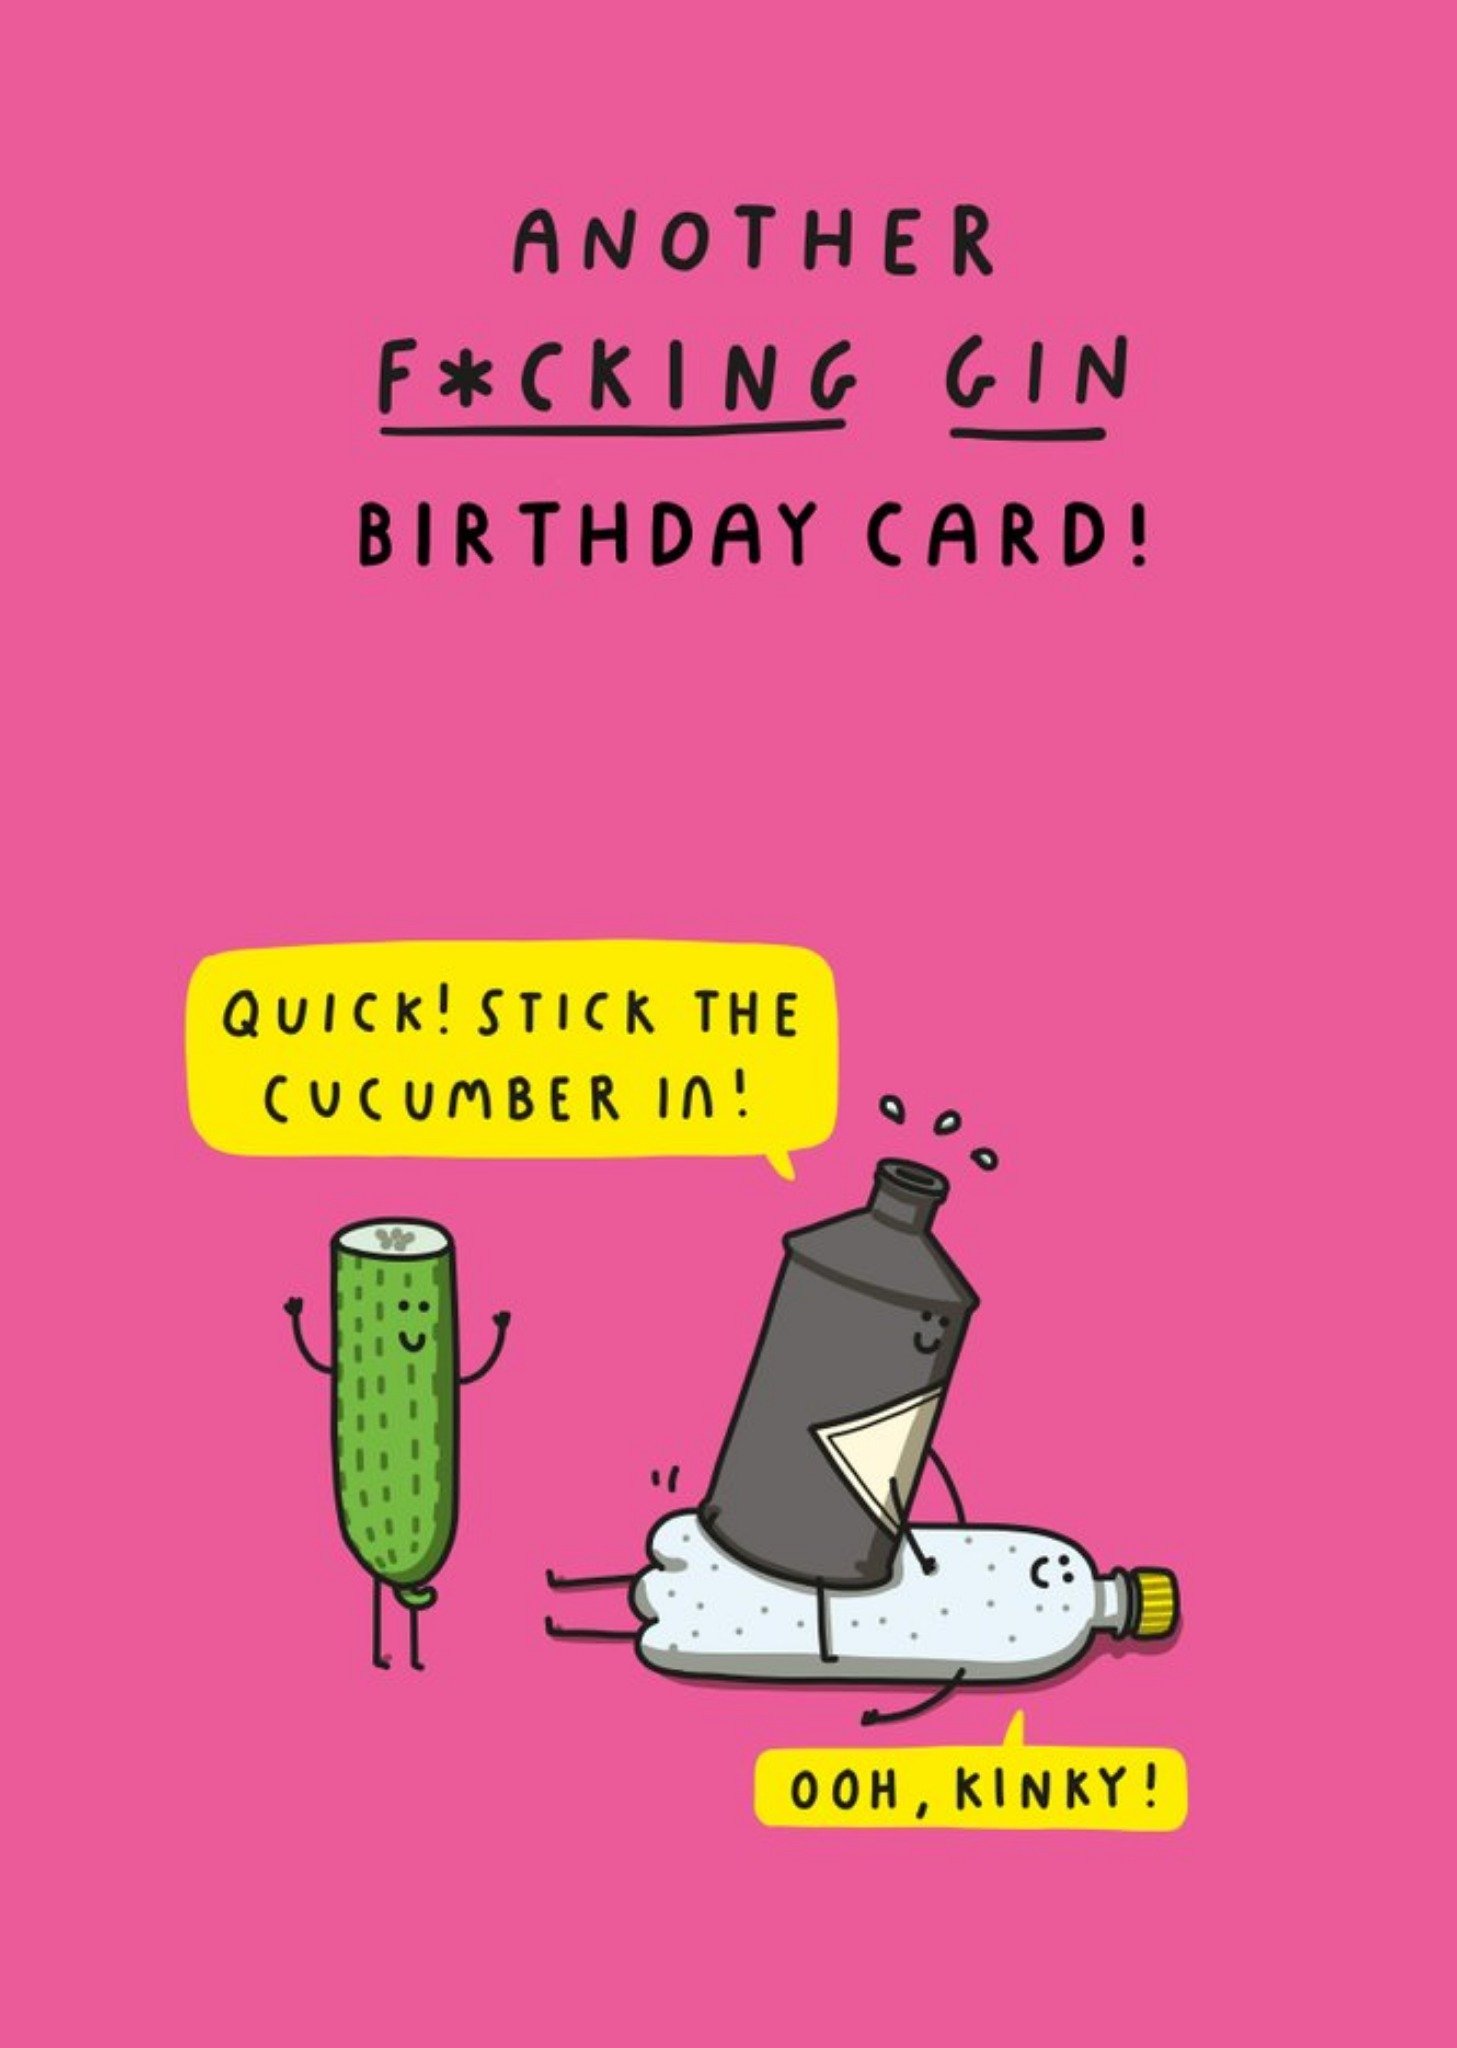 Moonpig Funny Rude Another Fucking Gin Birthday Card, Large